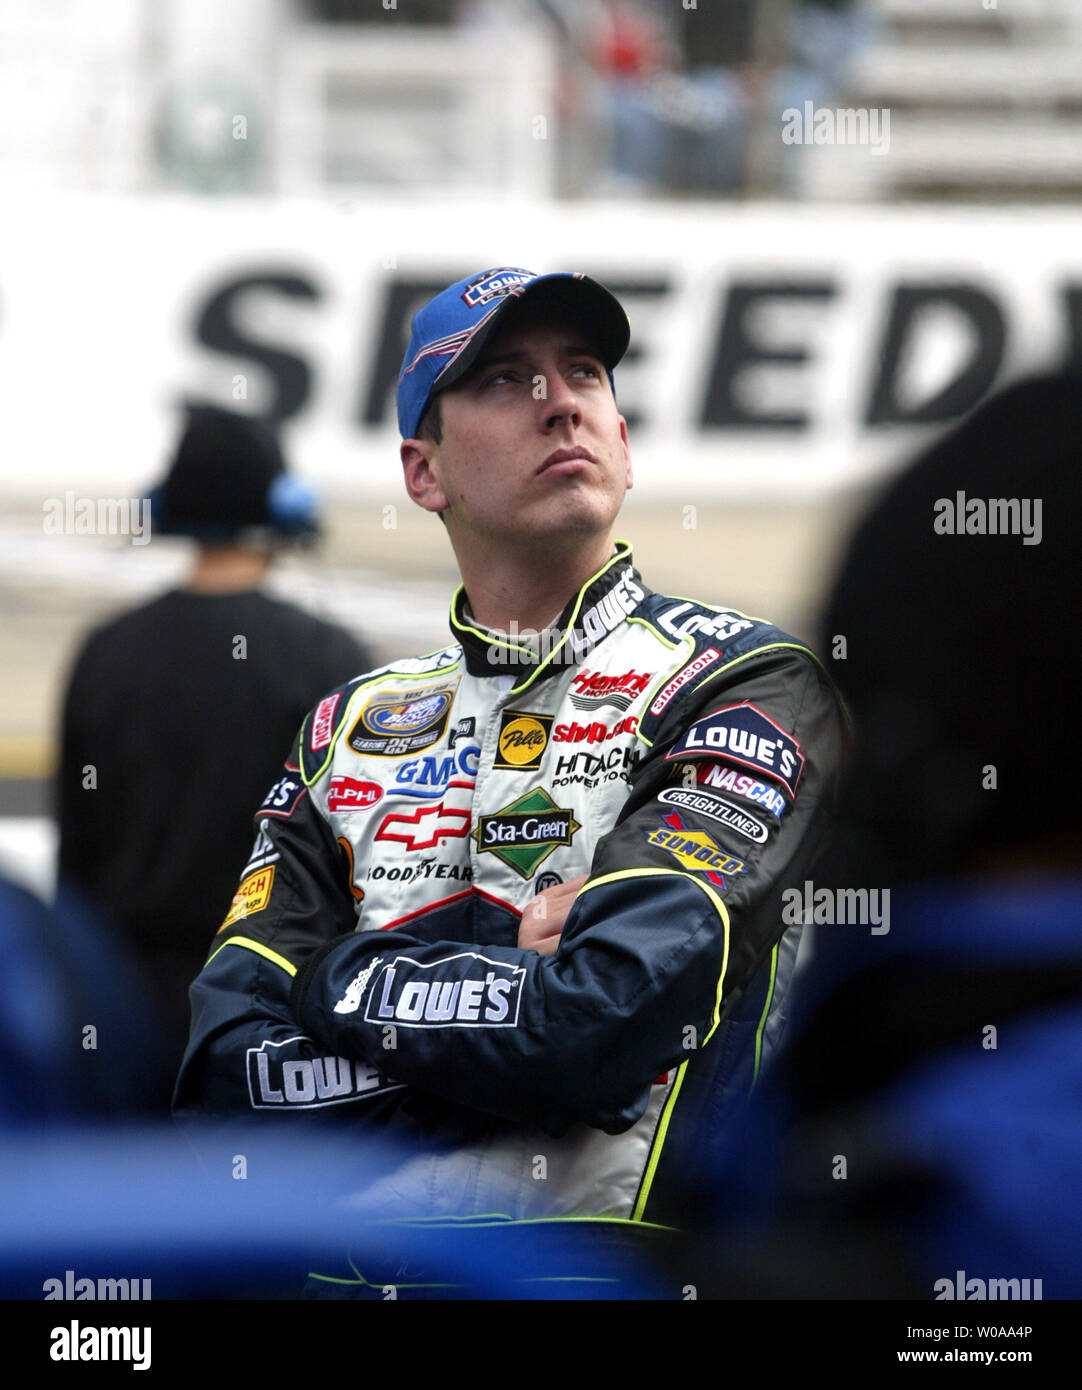 NASCAR driver Kyle Busch watches the leader board during practice at the Bristol Motor Speedway in Bristol, TN on March 25, 2006. (UPI Photo/Nell Redmond) Stock Photo